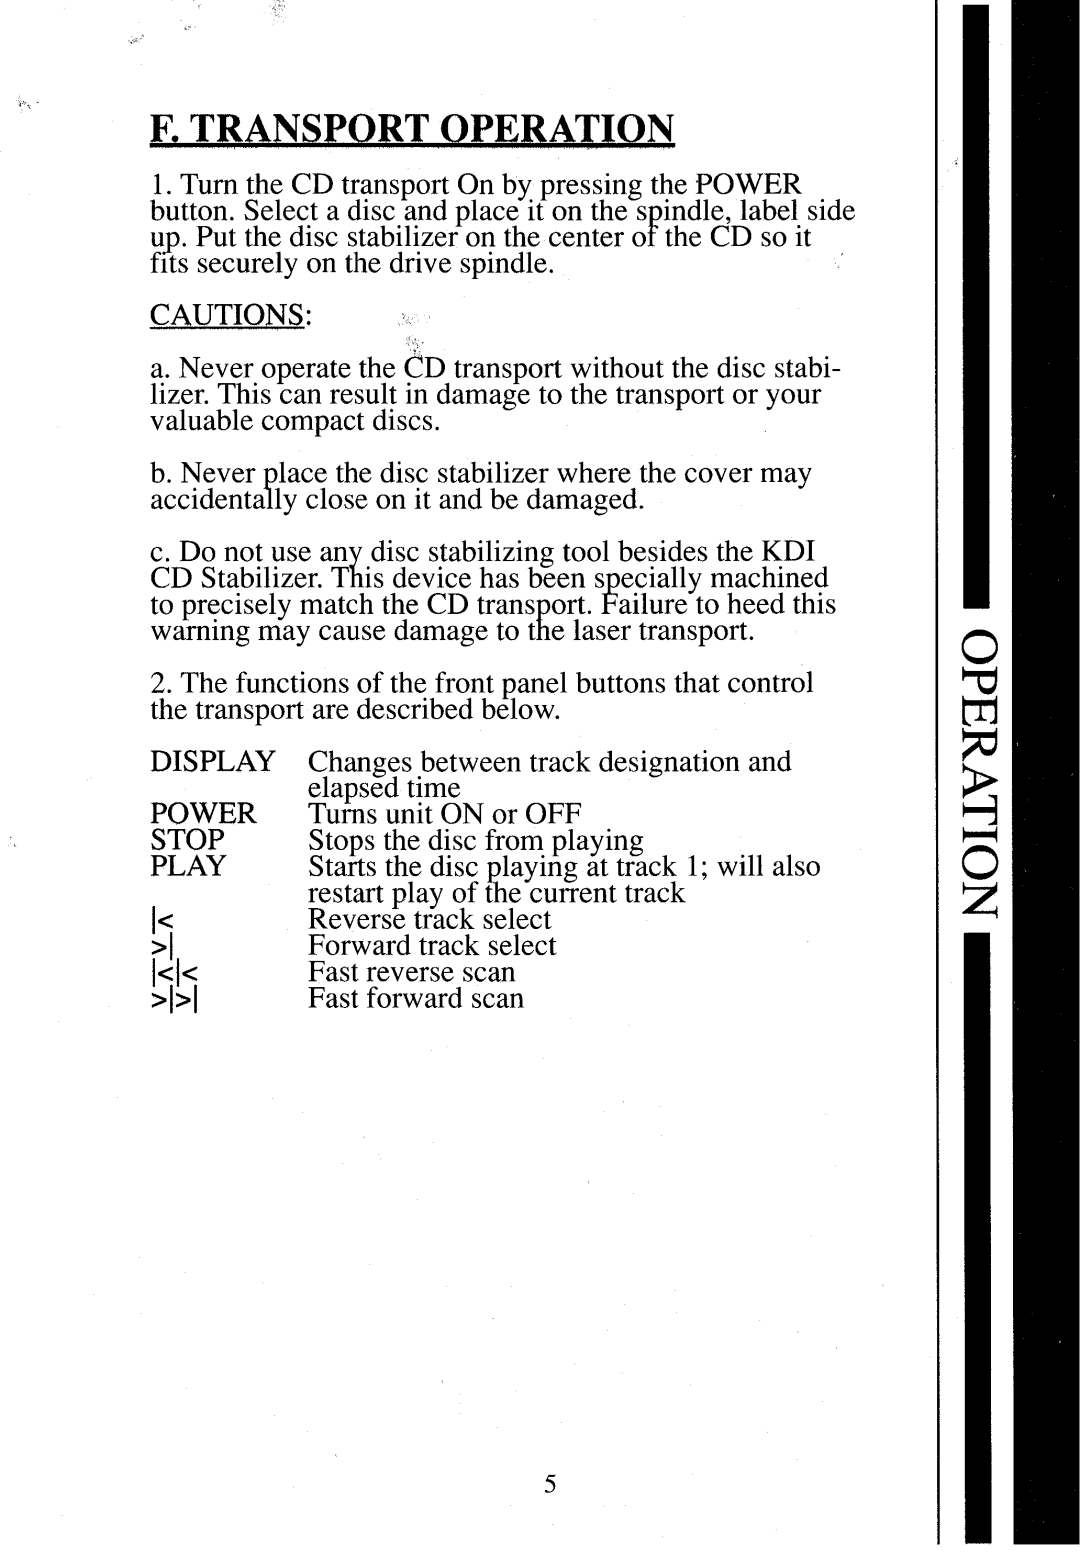 Krell Industries MD2 manual F.Transport Operation, Power Stop Play 